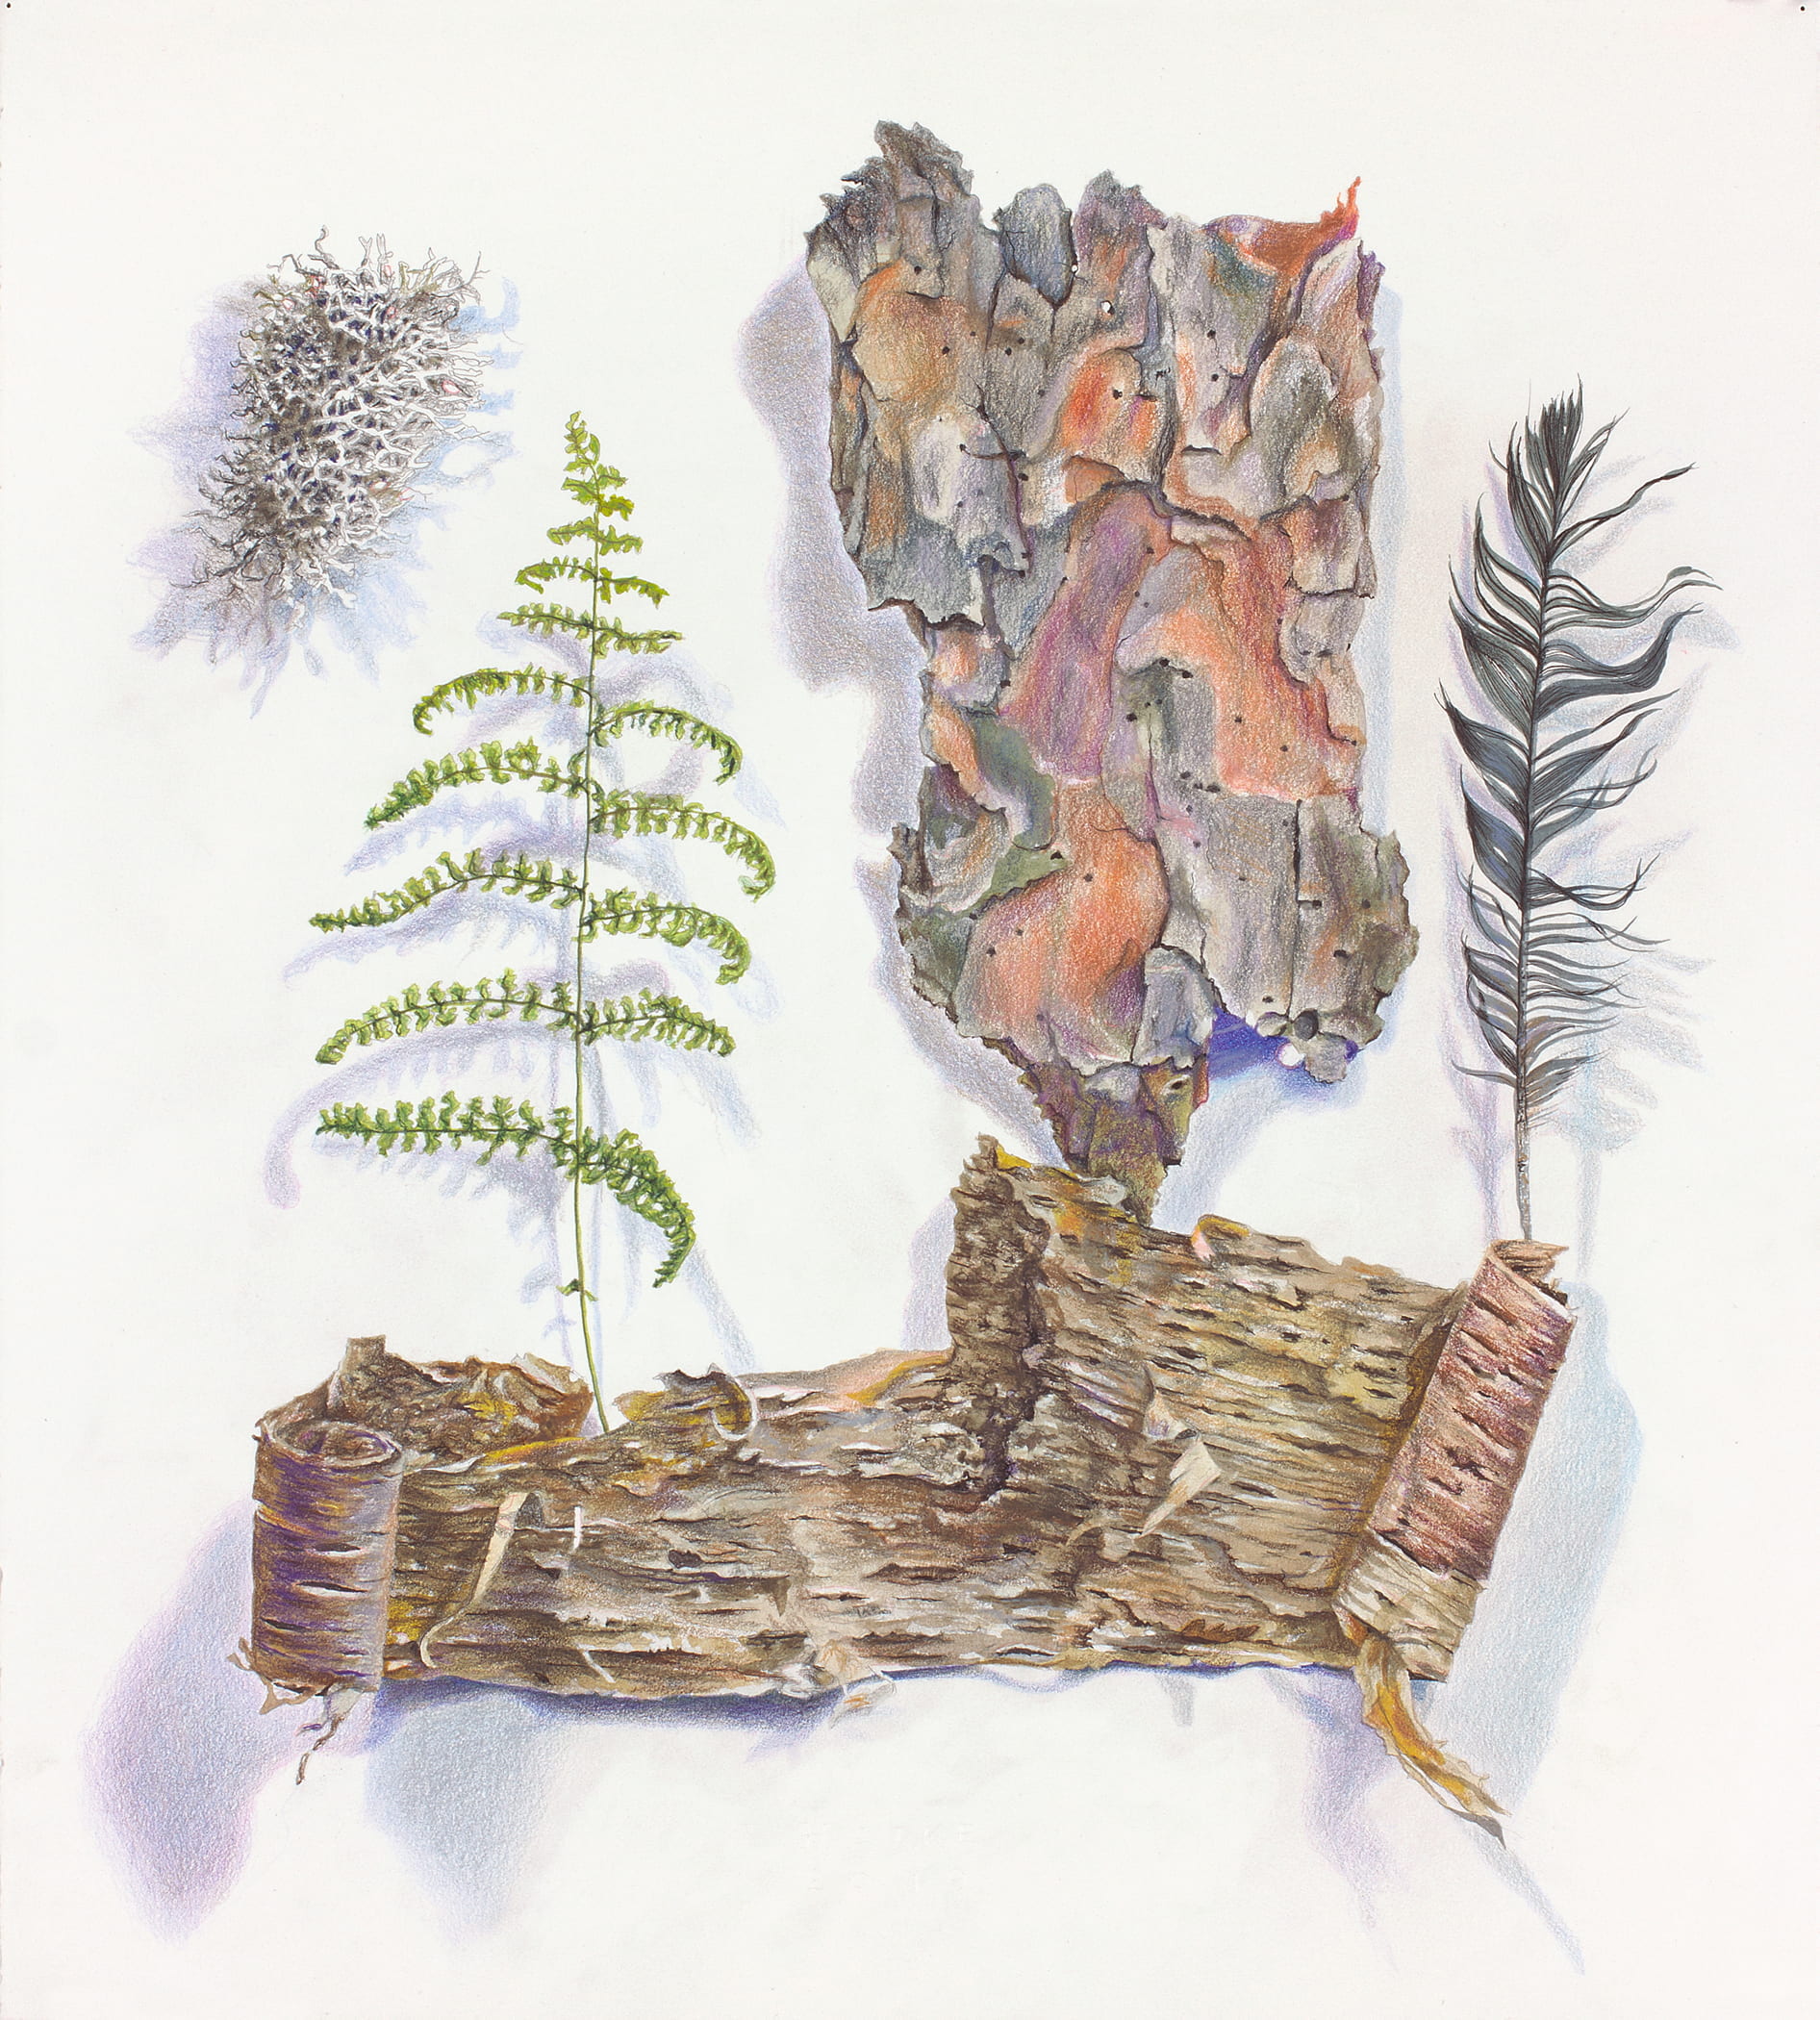 drawing and painting of a fern frond, moss, parks and a feather